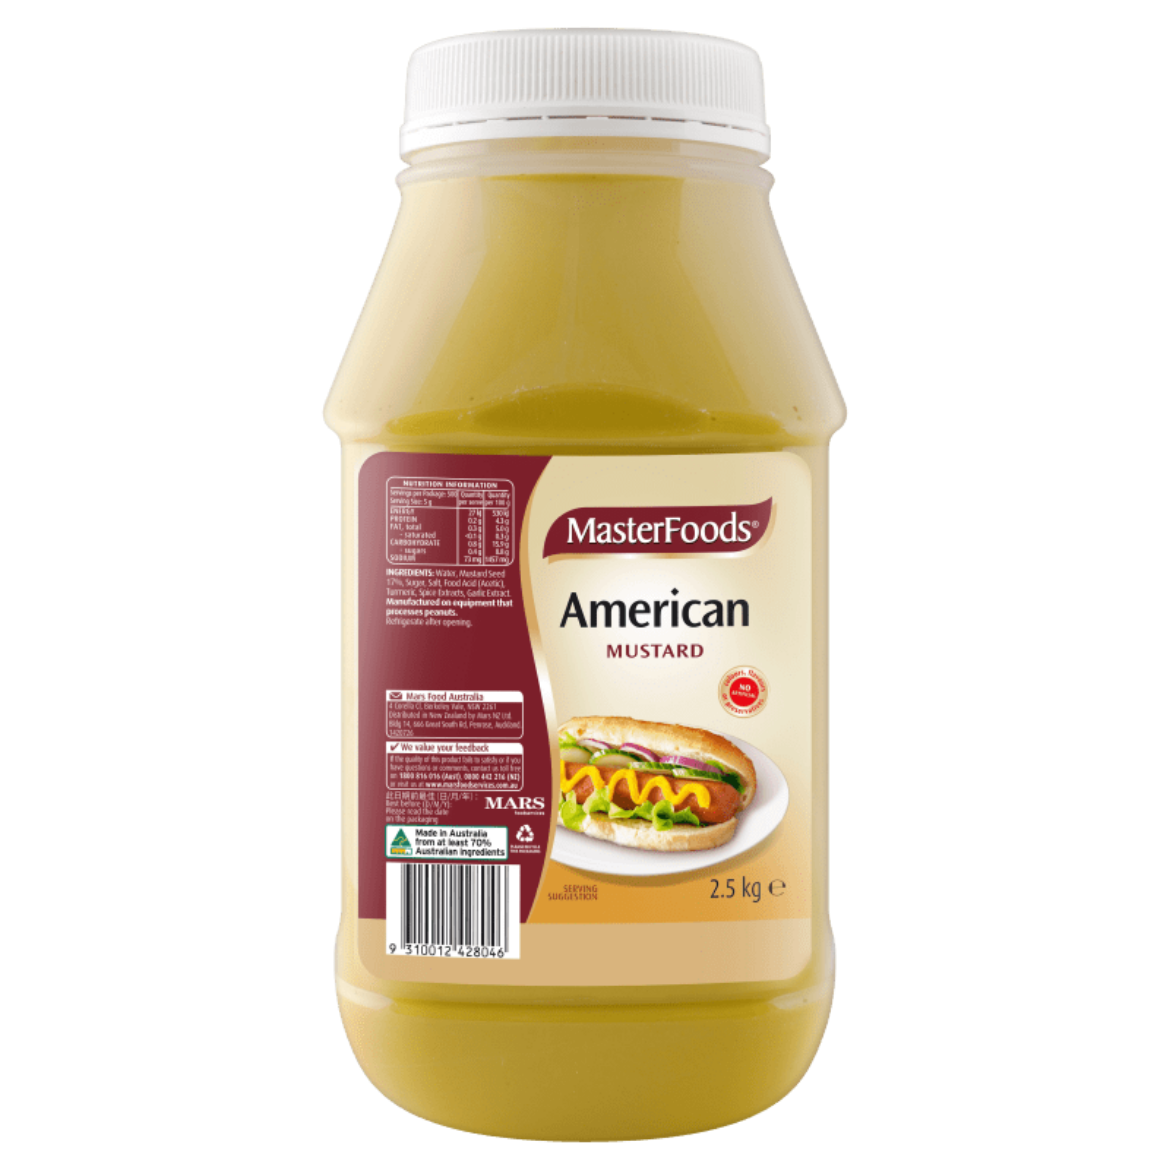 Picture of 2.5KG M/FOODS MUSTARD AMERICAN